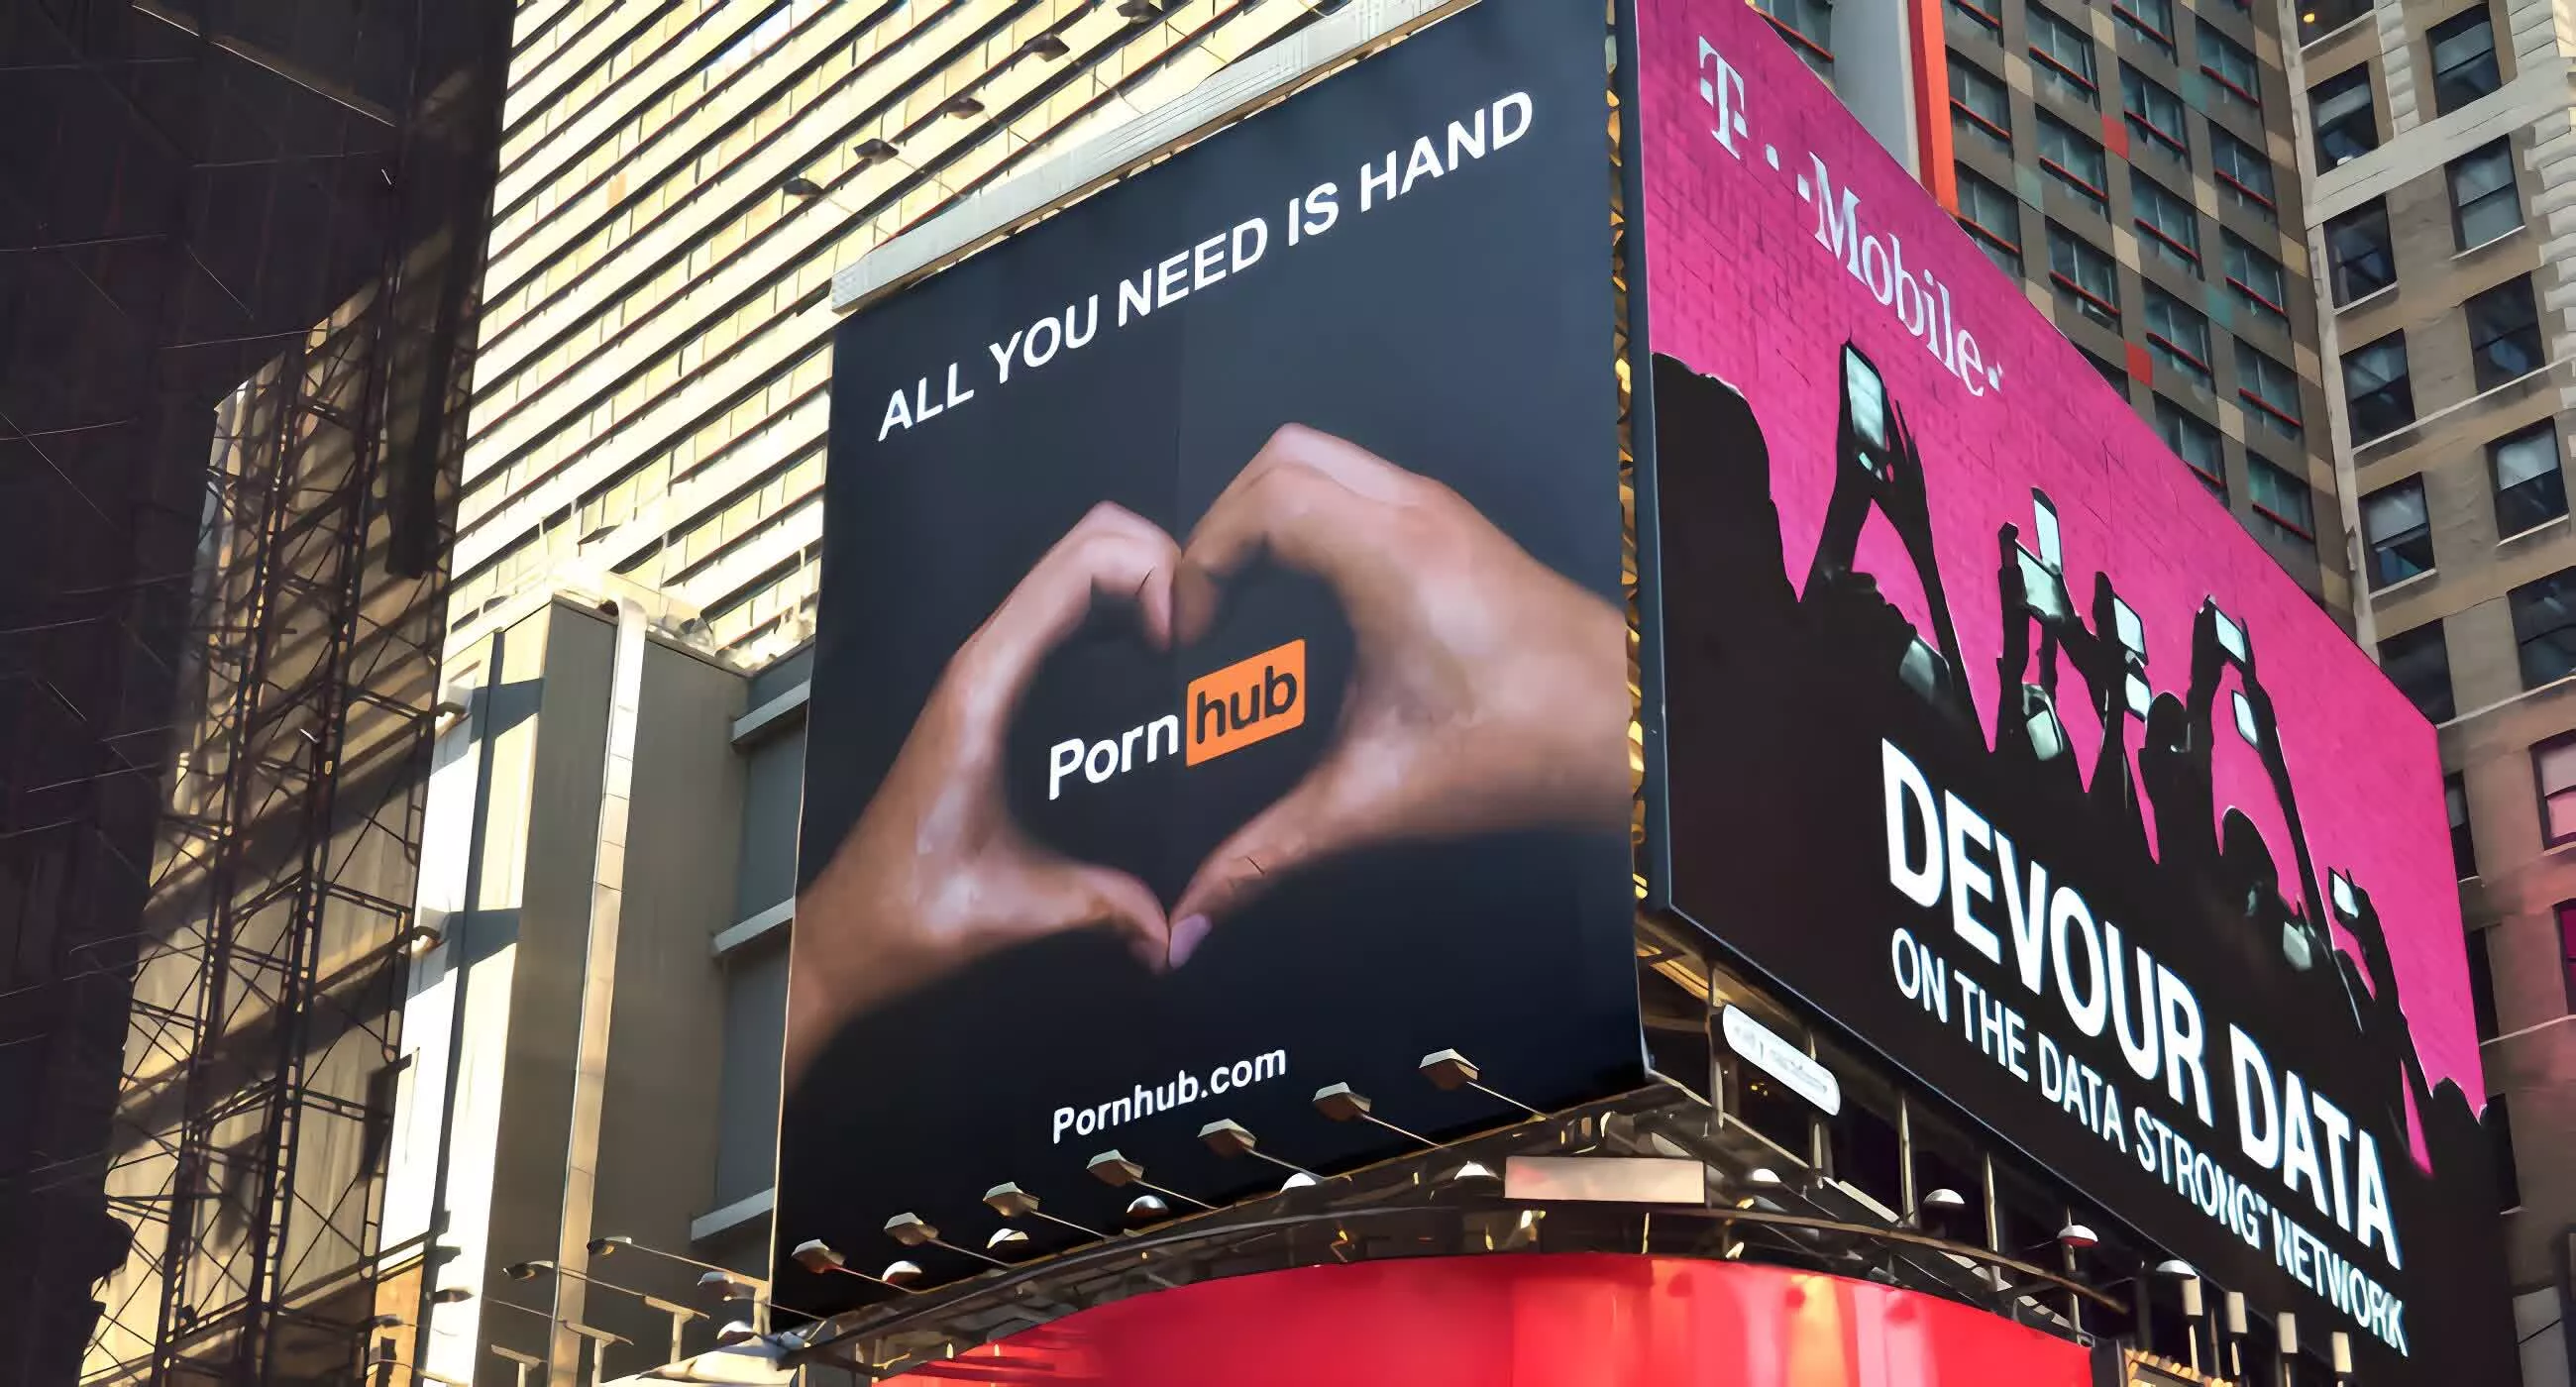 Pornhub parent company blocks access to its sites in Montana and North Carolina over age verification laws